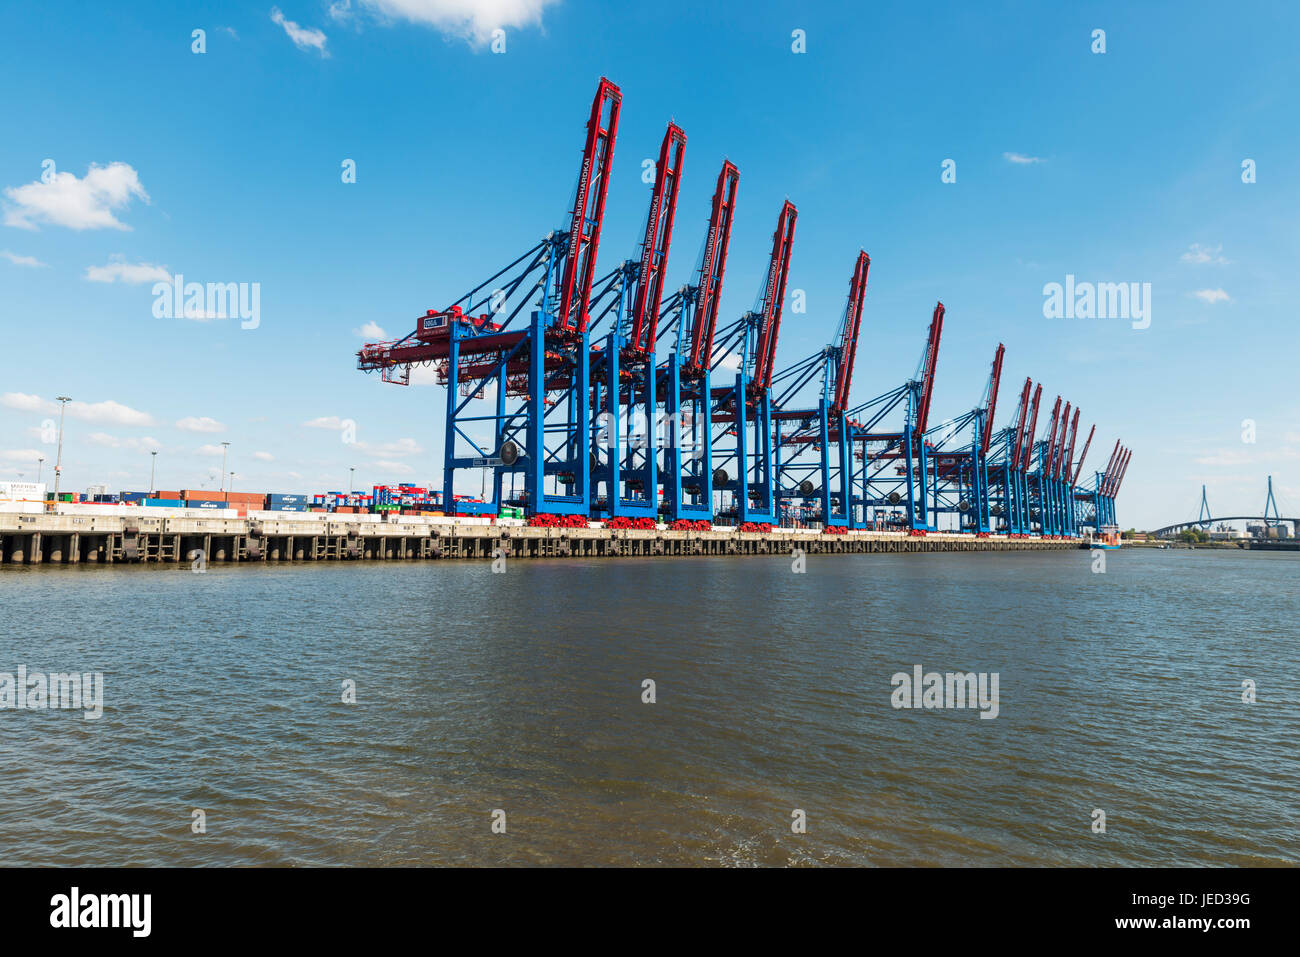 Hamburg, Germany - April 30, 2017: Beautiful view of Hamburg habour and cargo port,  the largest port in Germany and one of the busiest ports in Europ Stock Photo